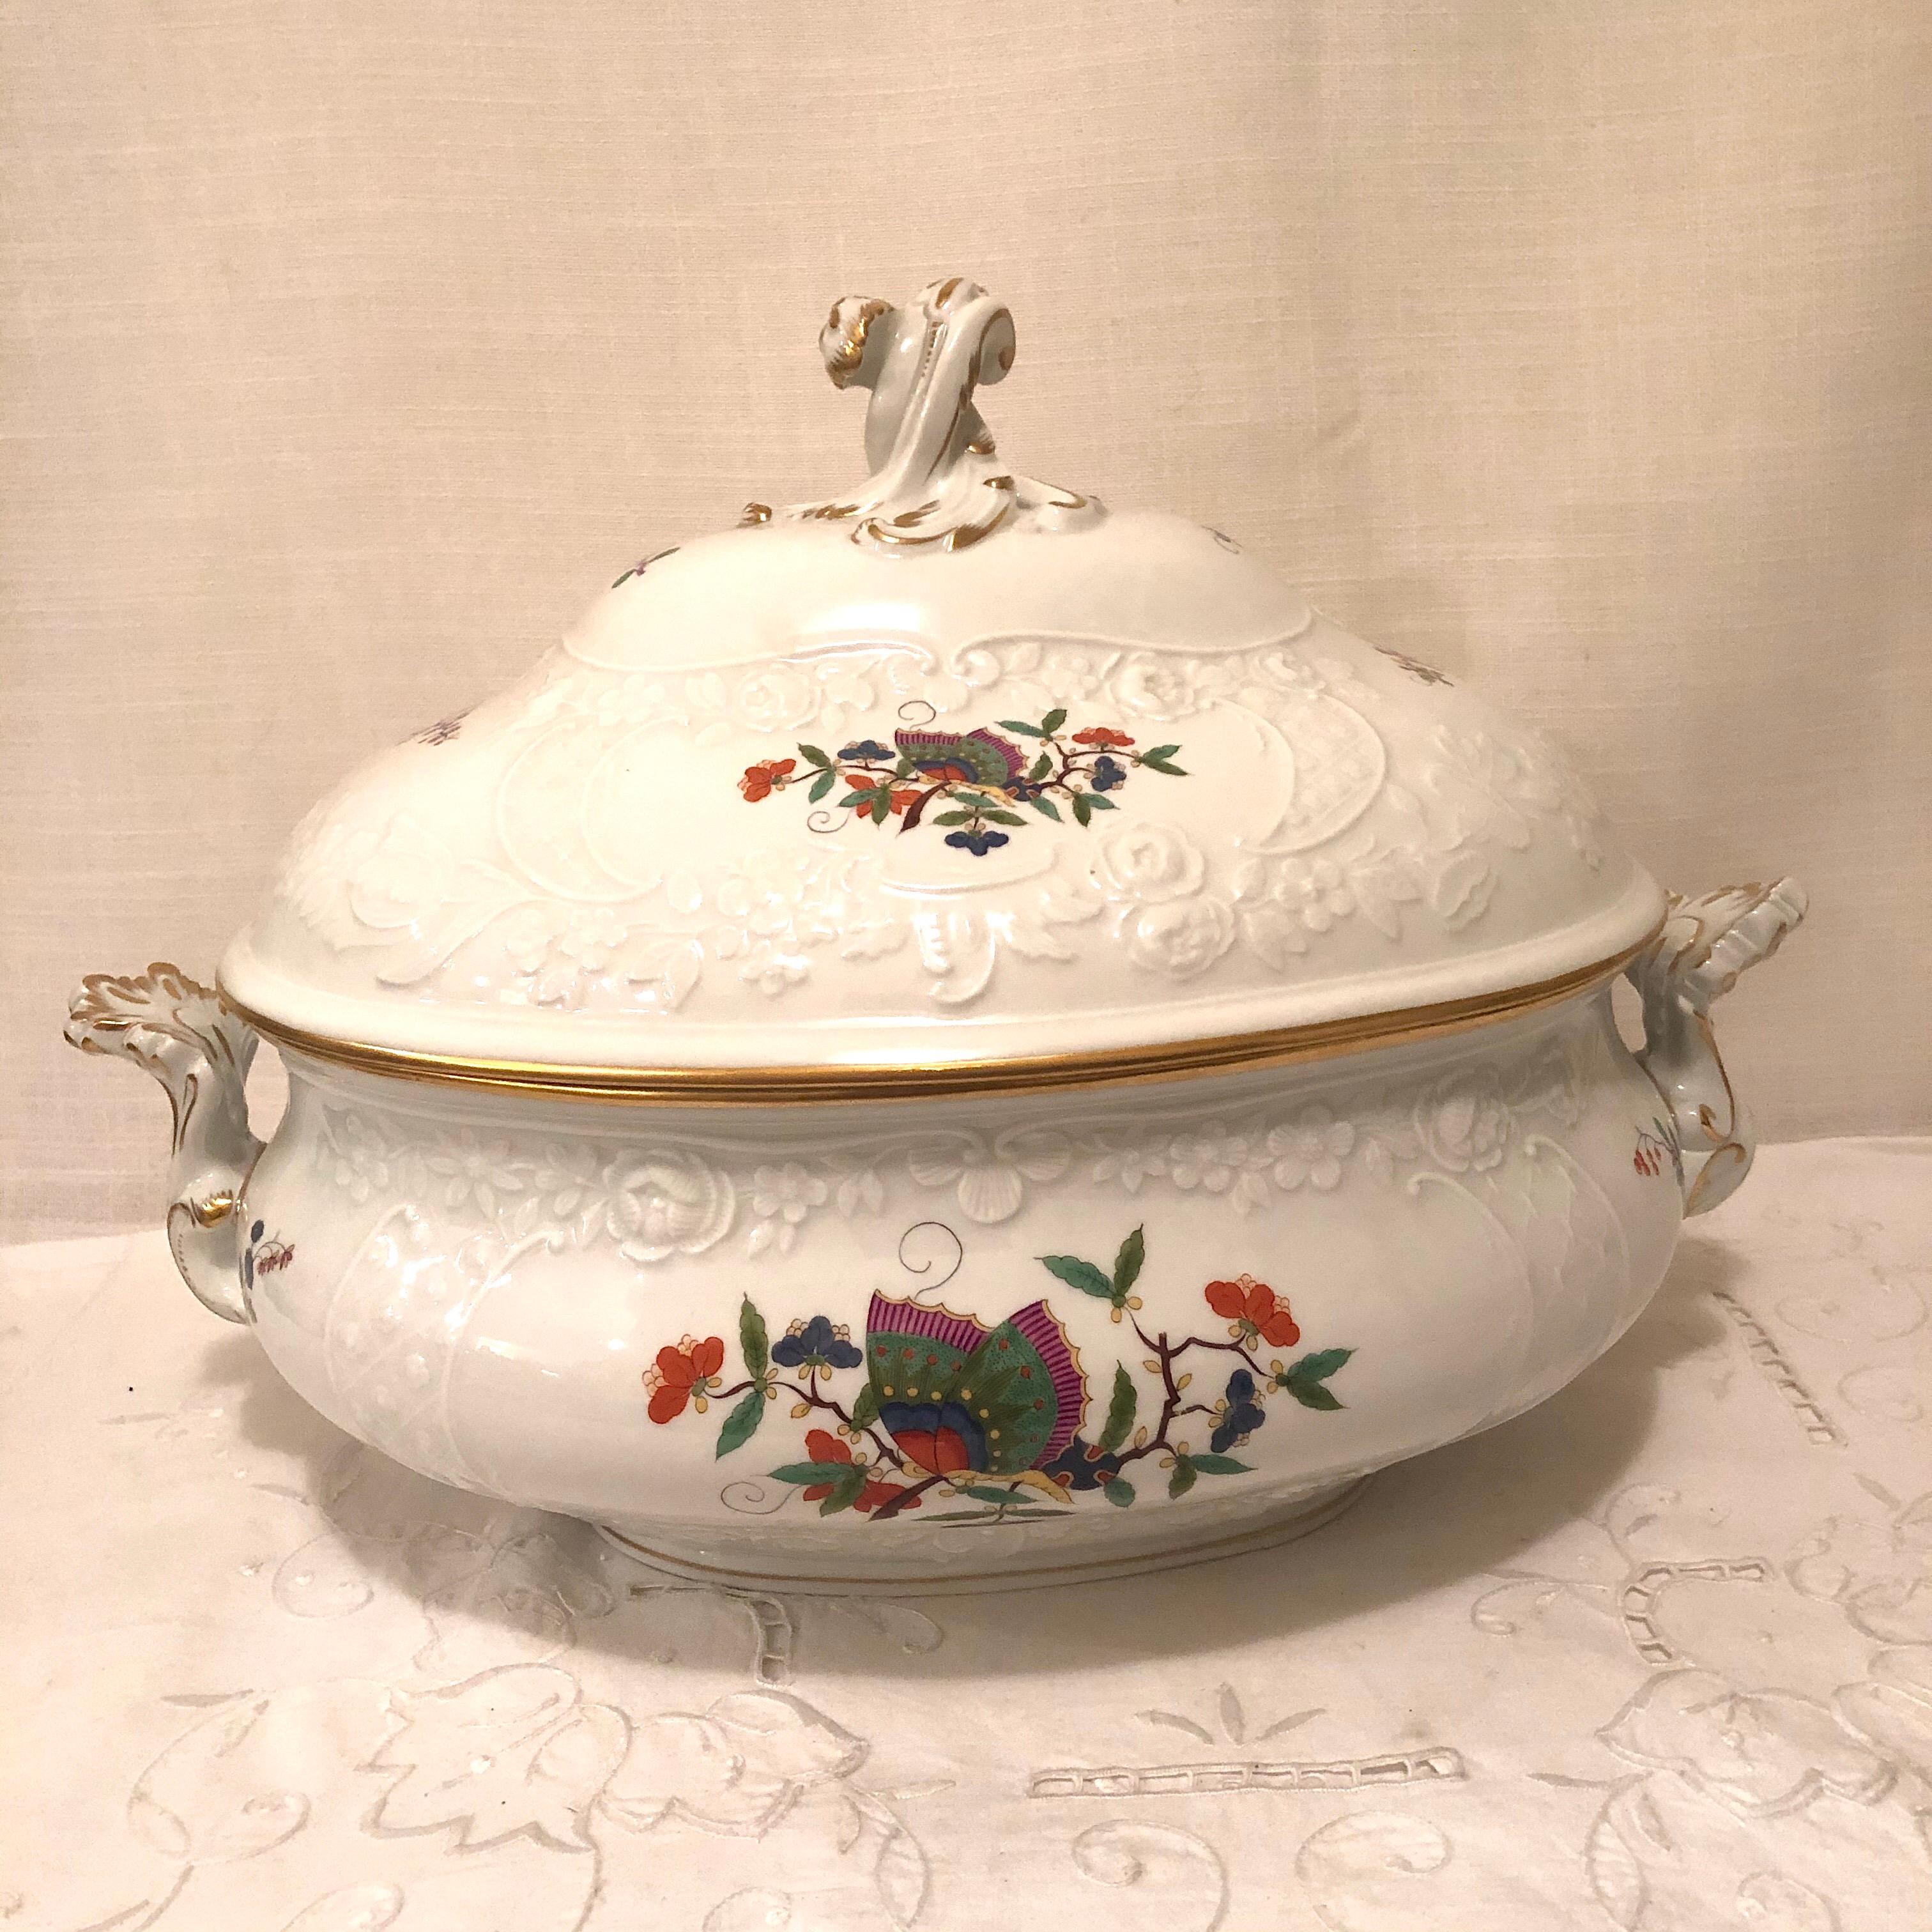 I am proud to offer you this rare Meissen Chinese butterfly soup tureen. The tureen is painted in the Kakiemon style with a central Chinese butterfly on a branch, surrounded by flowering branches. The central decoration of the tureen is influenced